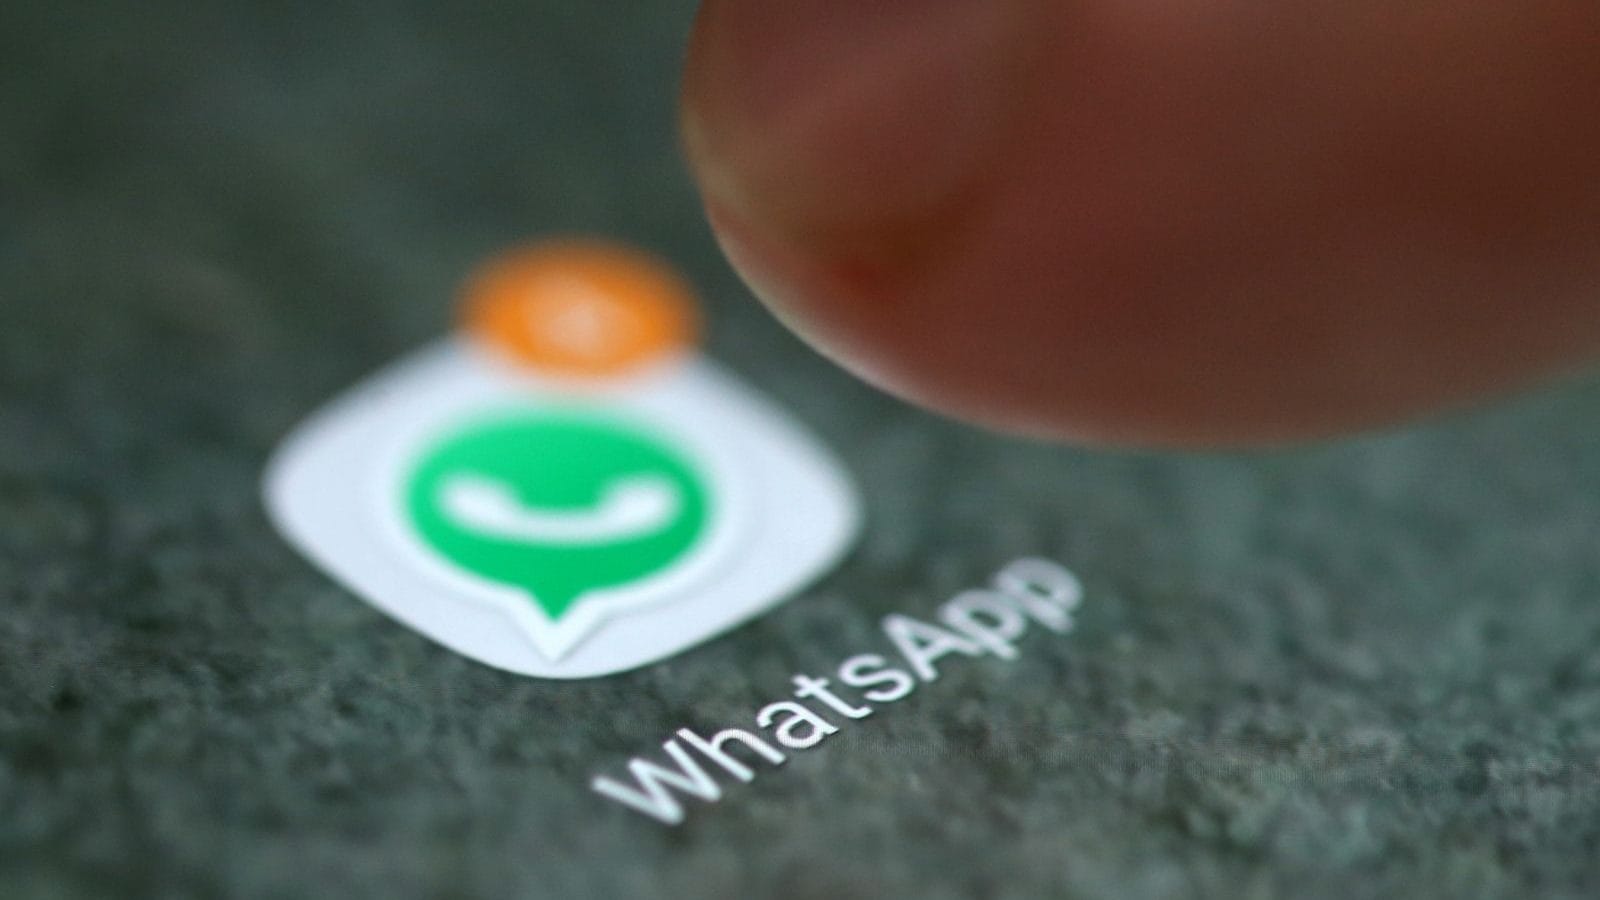 Why It’s The Next Big WhatsApp Feature